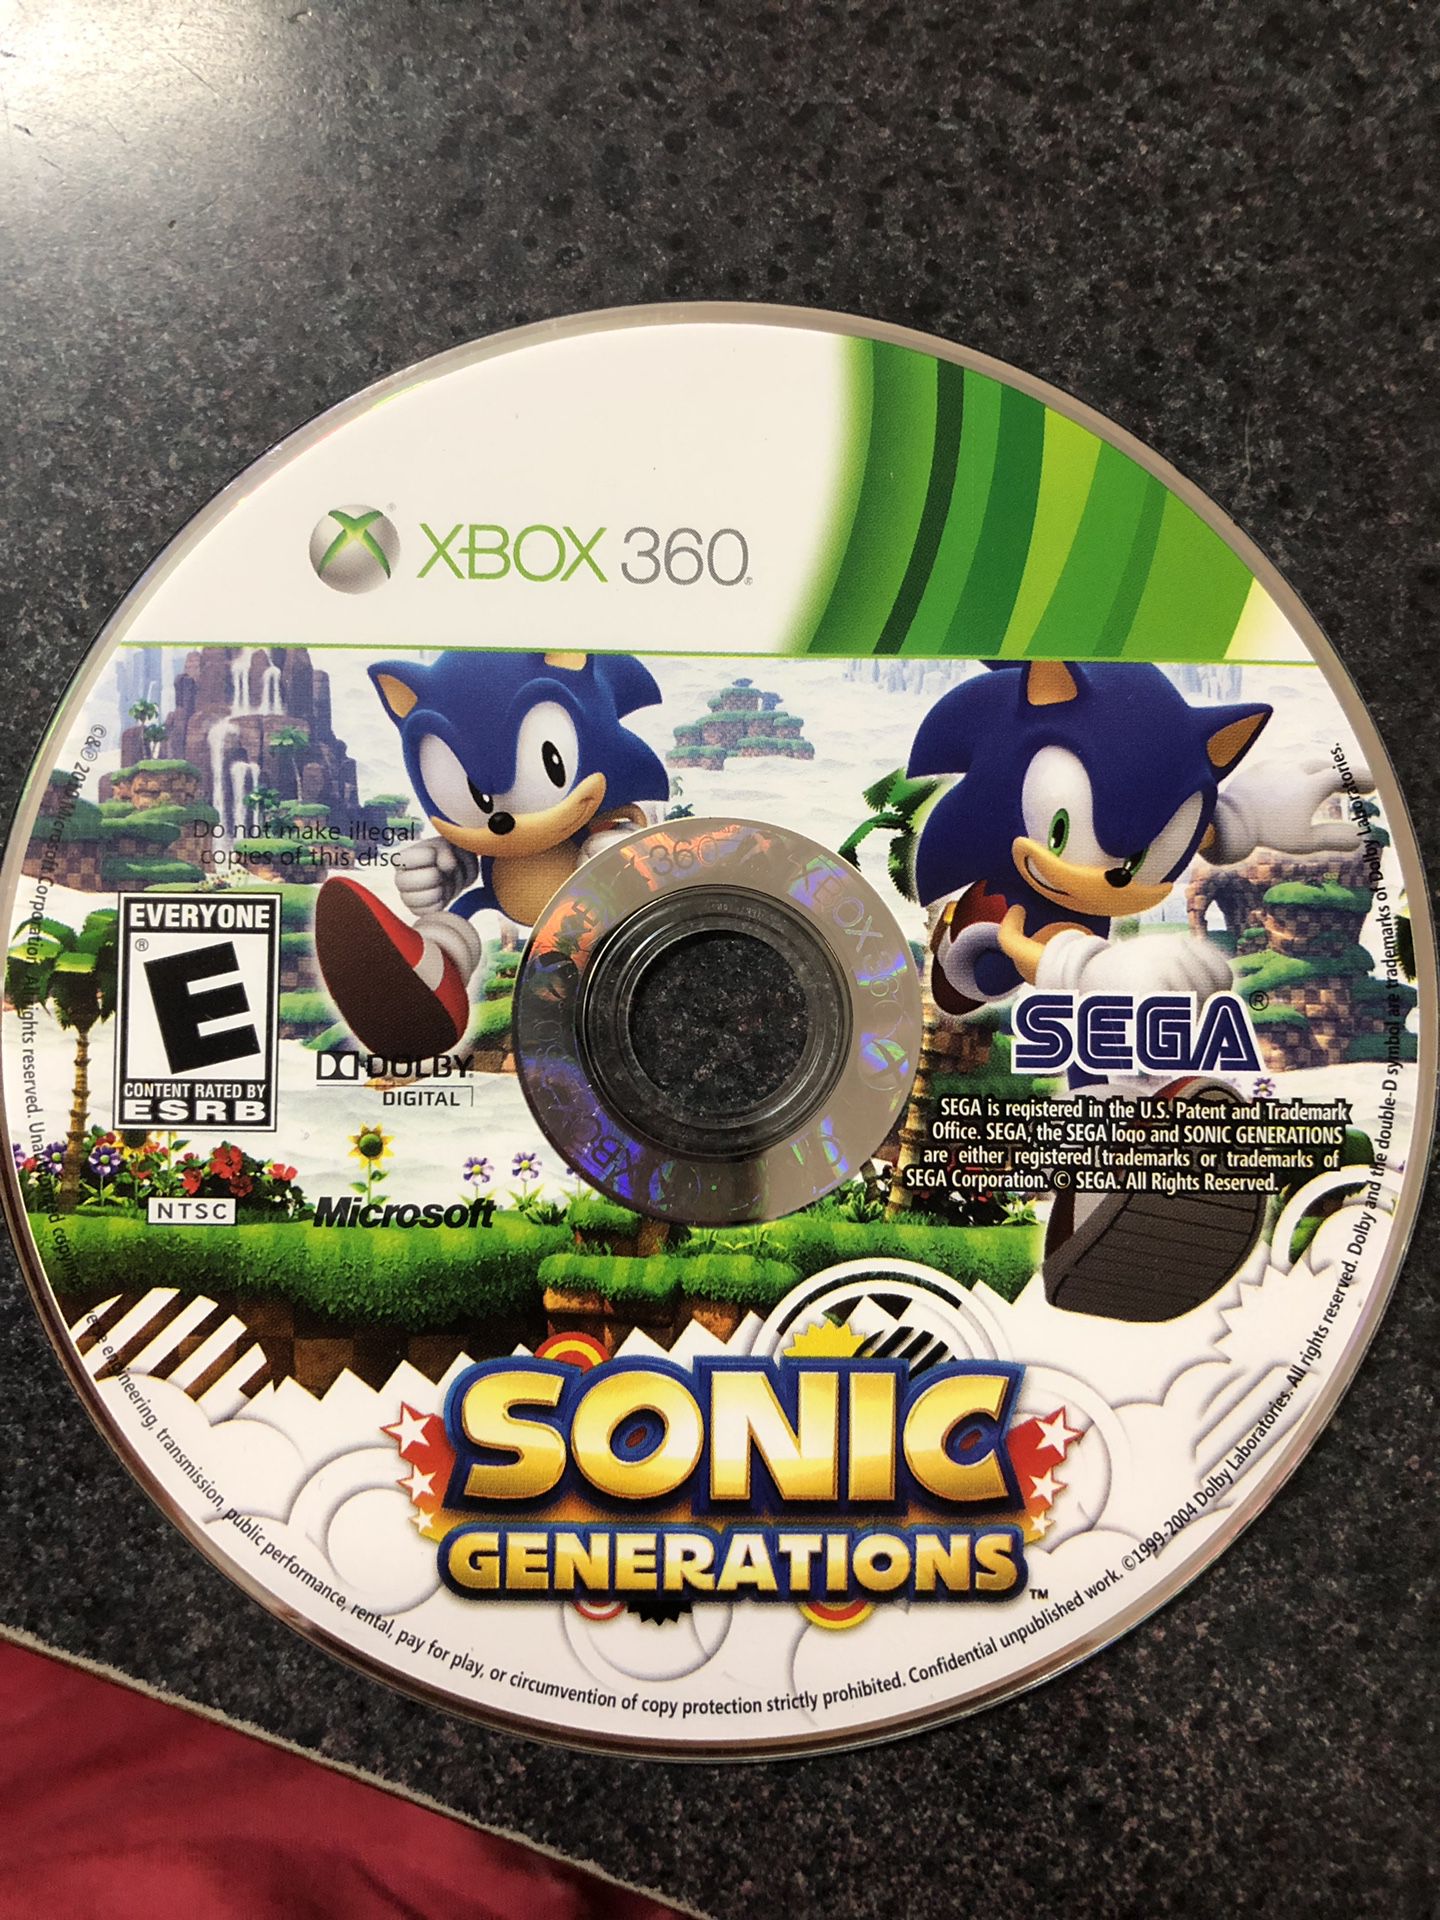 Sonic Generations game for Xbox 360